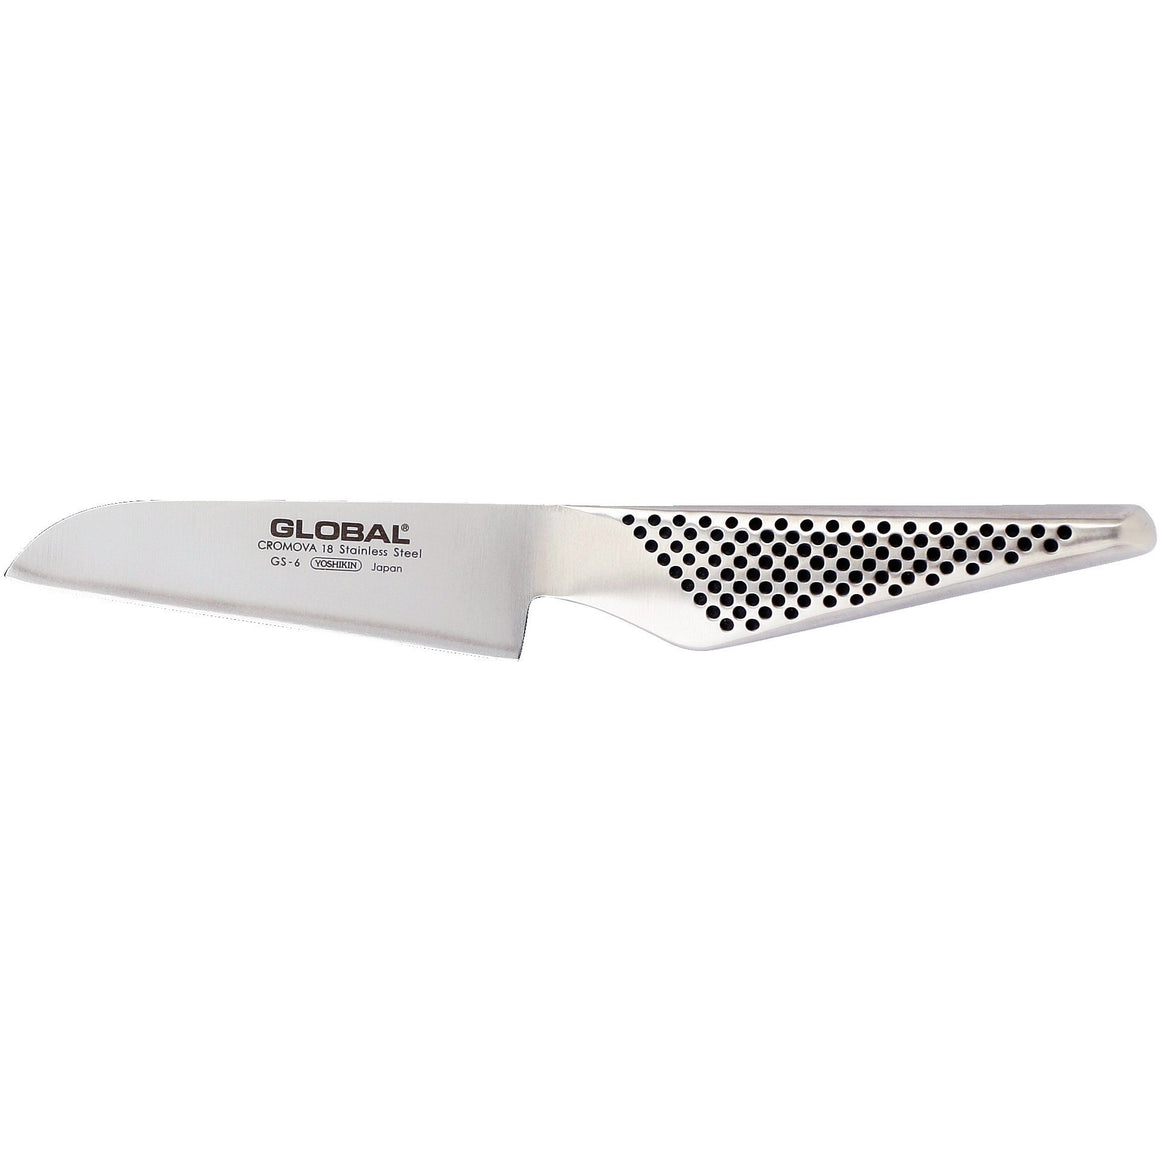 Global GS Series10cm Straight Paring Knife